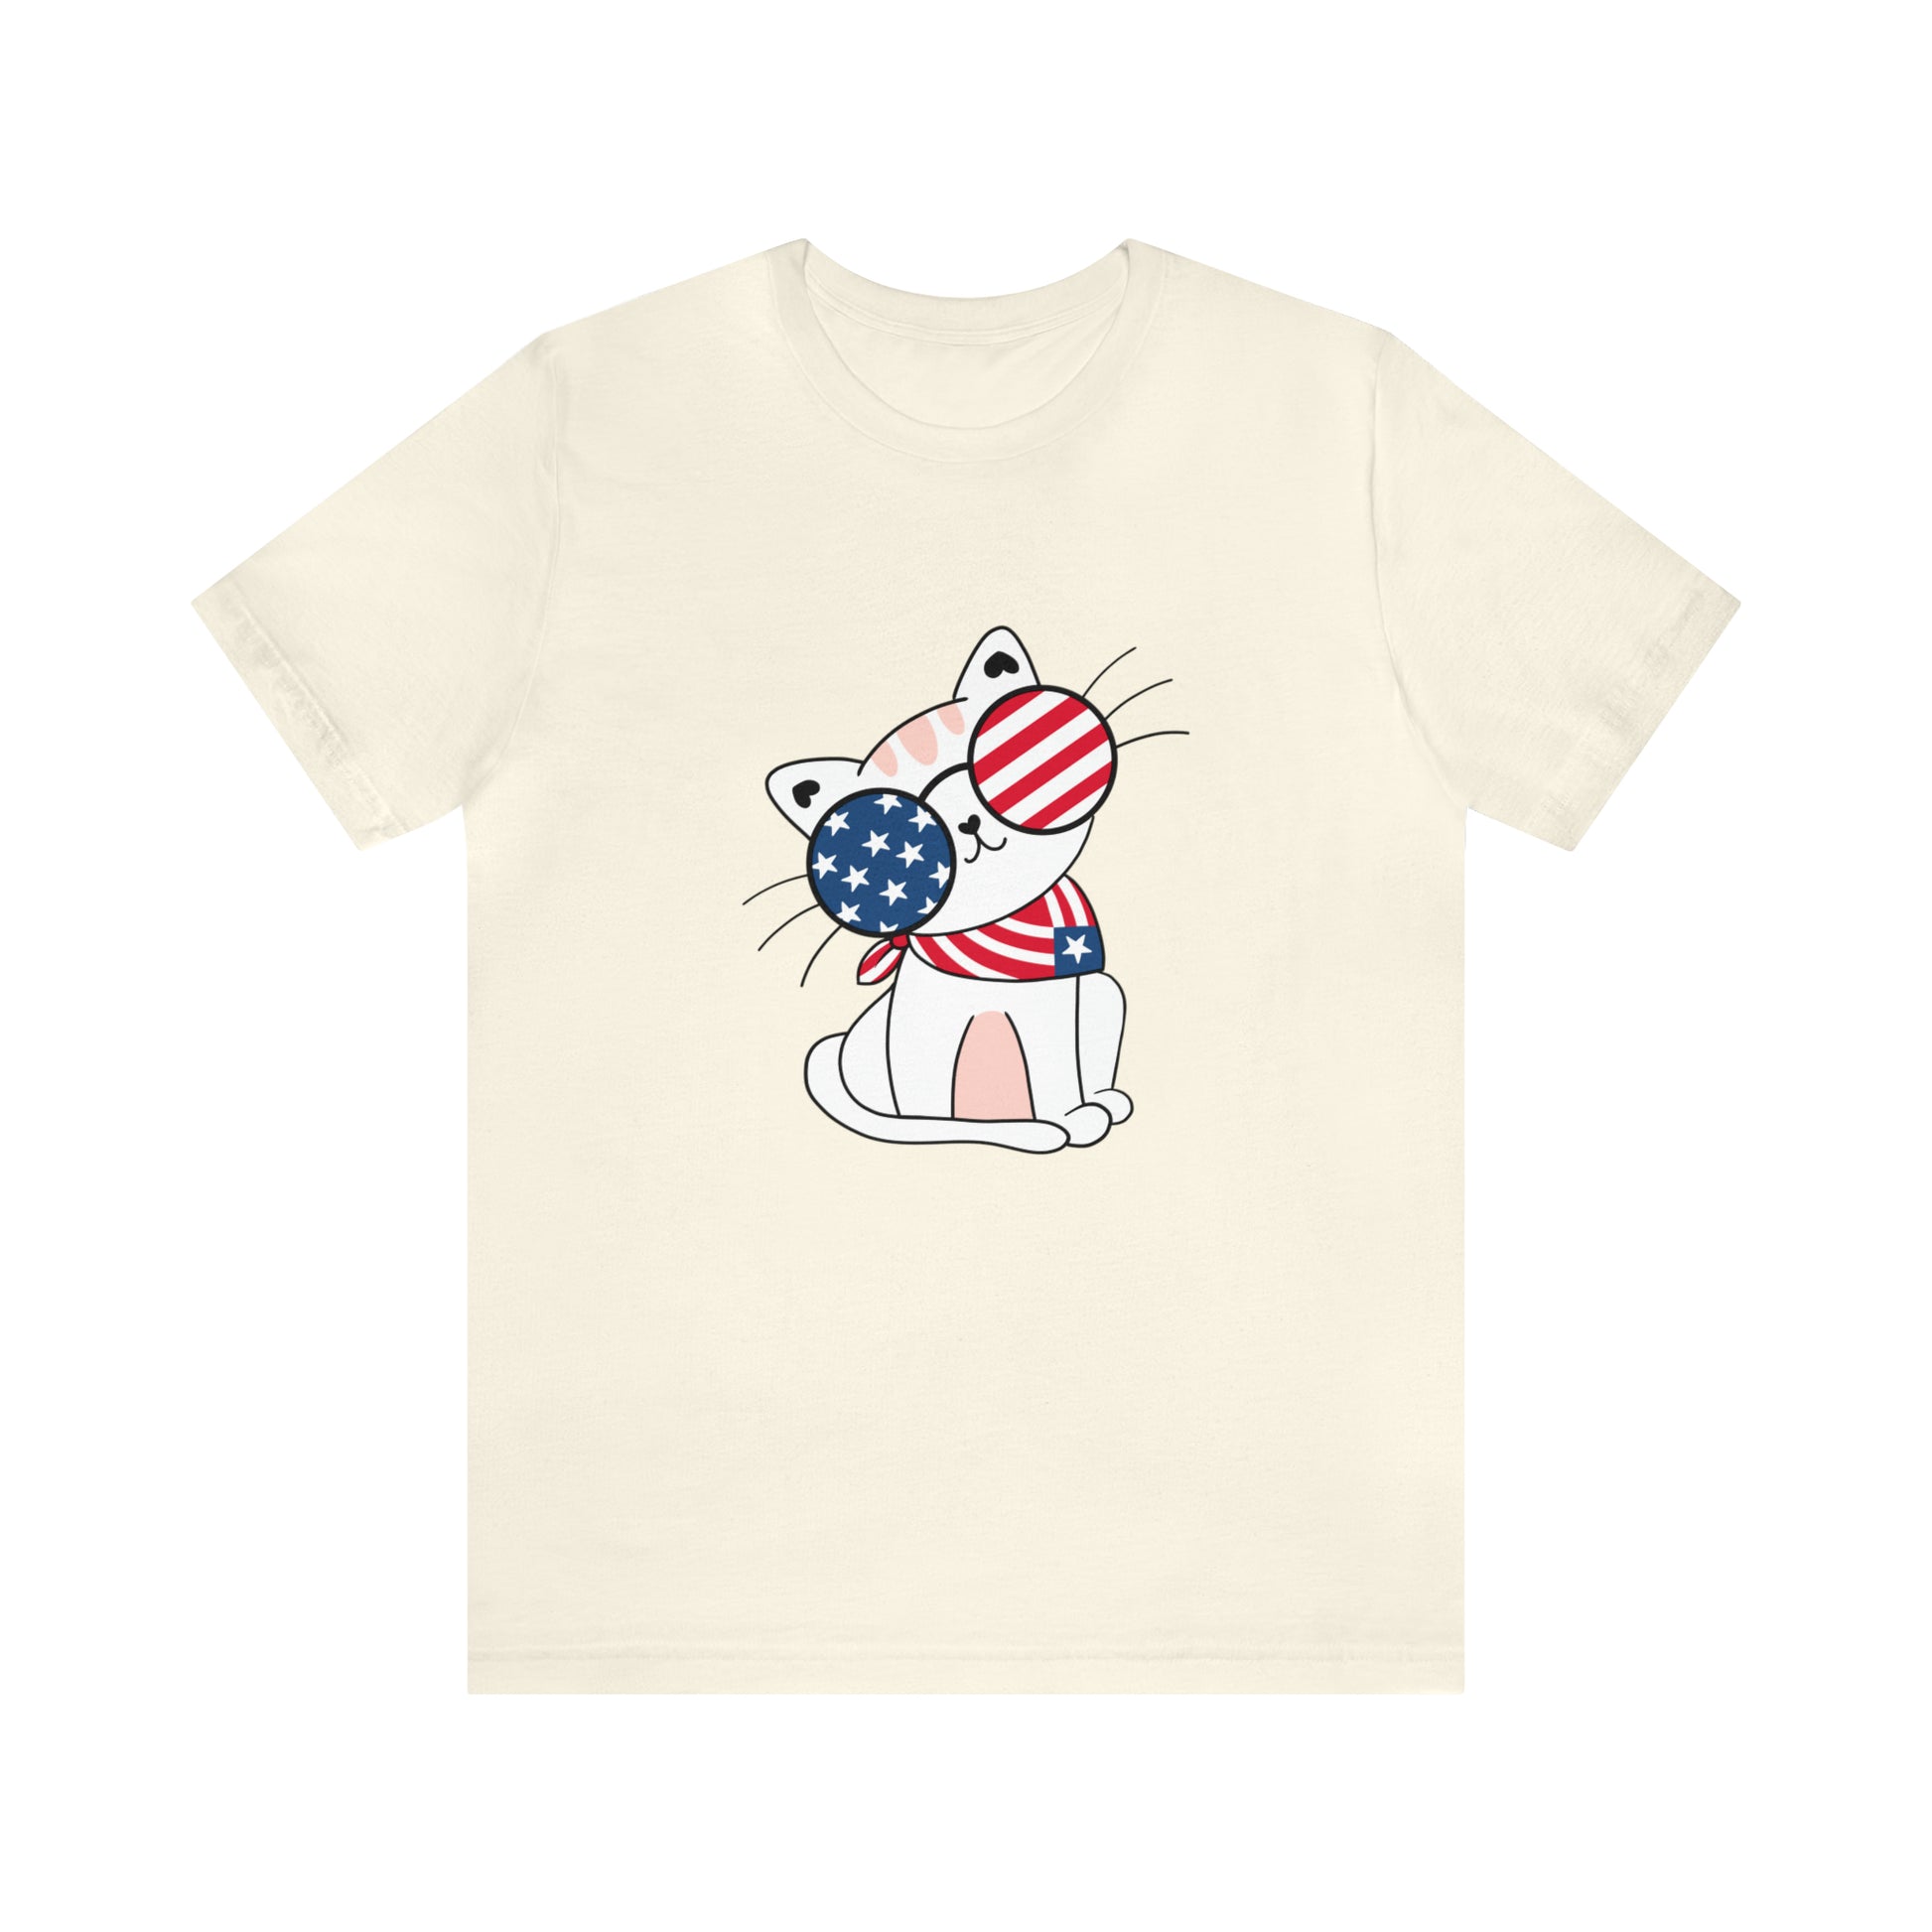 Cat wear sunglass shirt, USA Shirt, Independence Day Tee, 4th of July women's shirt, Fourth of July Tee, Printify